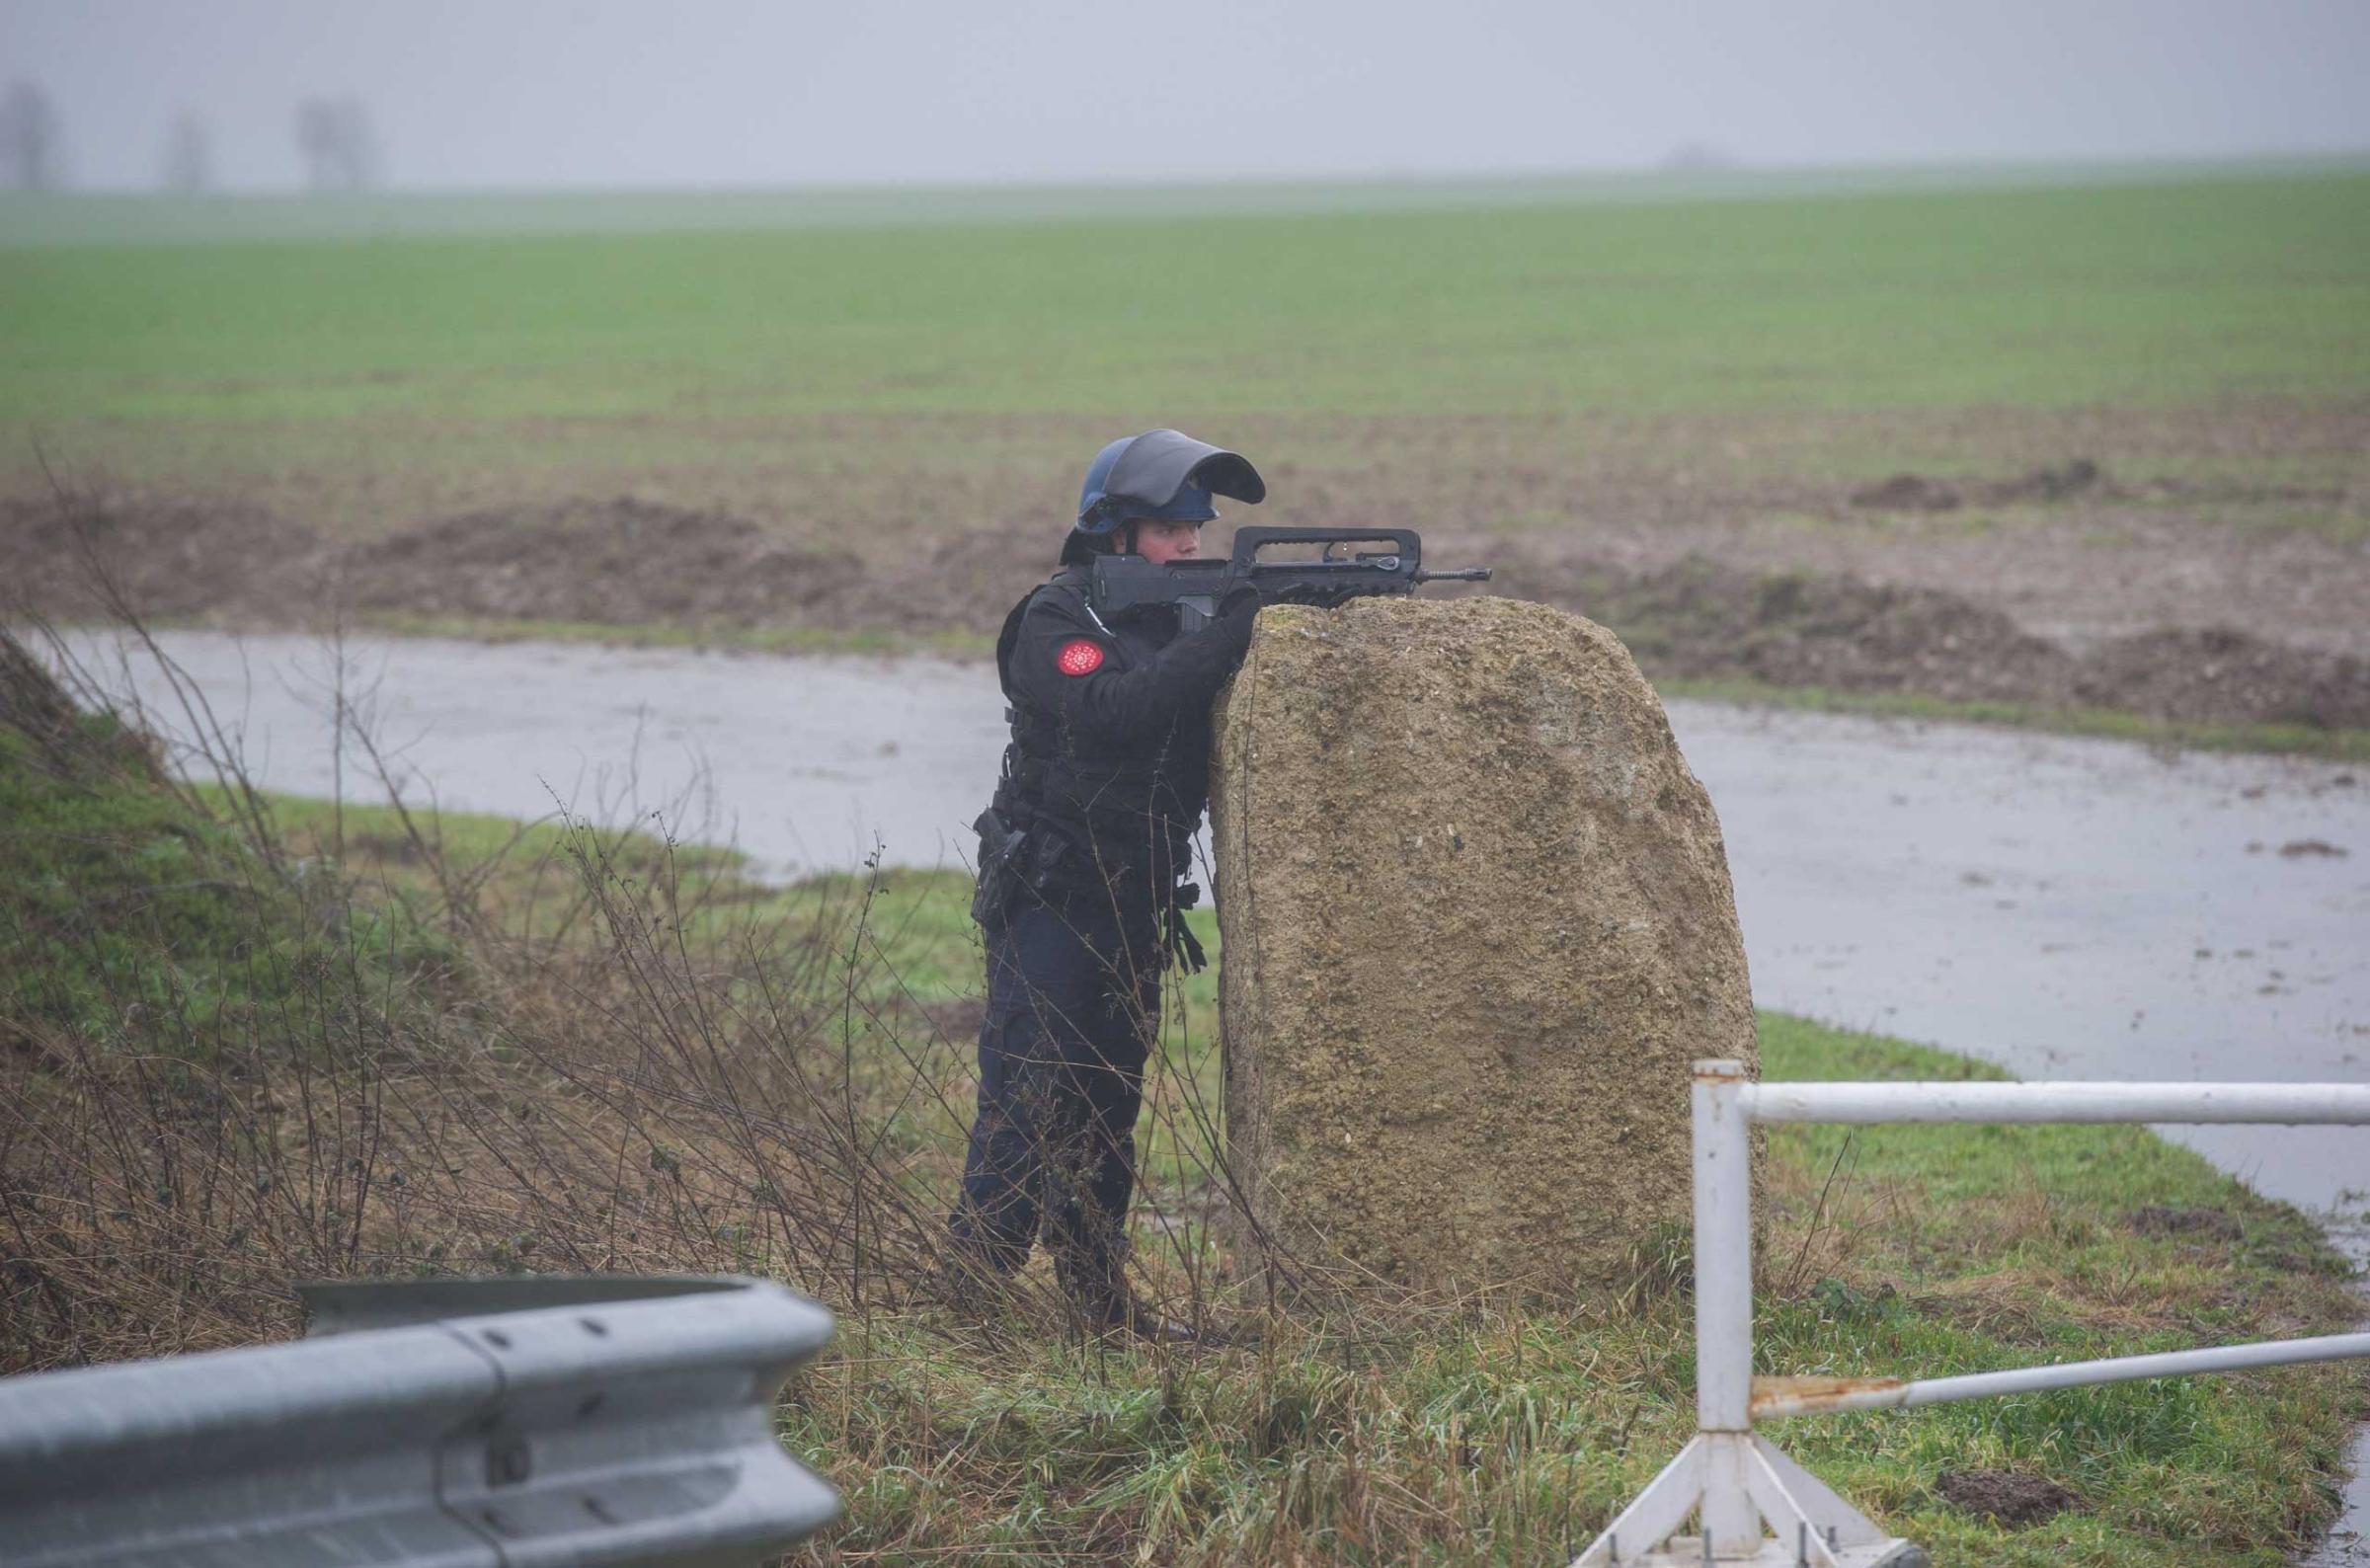 French police officers patrol in Dammartin-en-Goele where two brothers suspected of slaughtering 12 people in an Islamist attack on French satirical newspaper Charlie Hebdo held one person hostage as police cornered the gunmen, on Jan. 9, 2015.